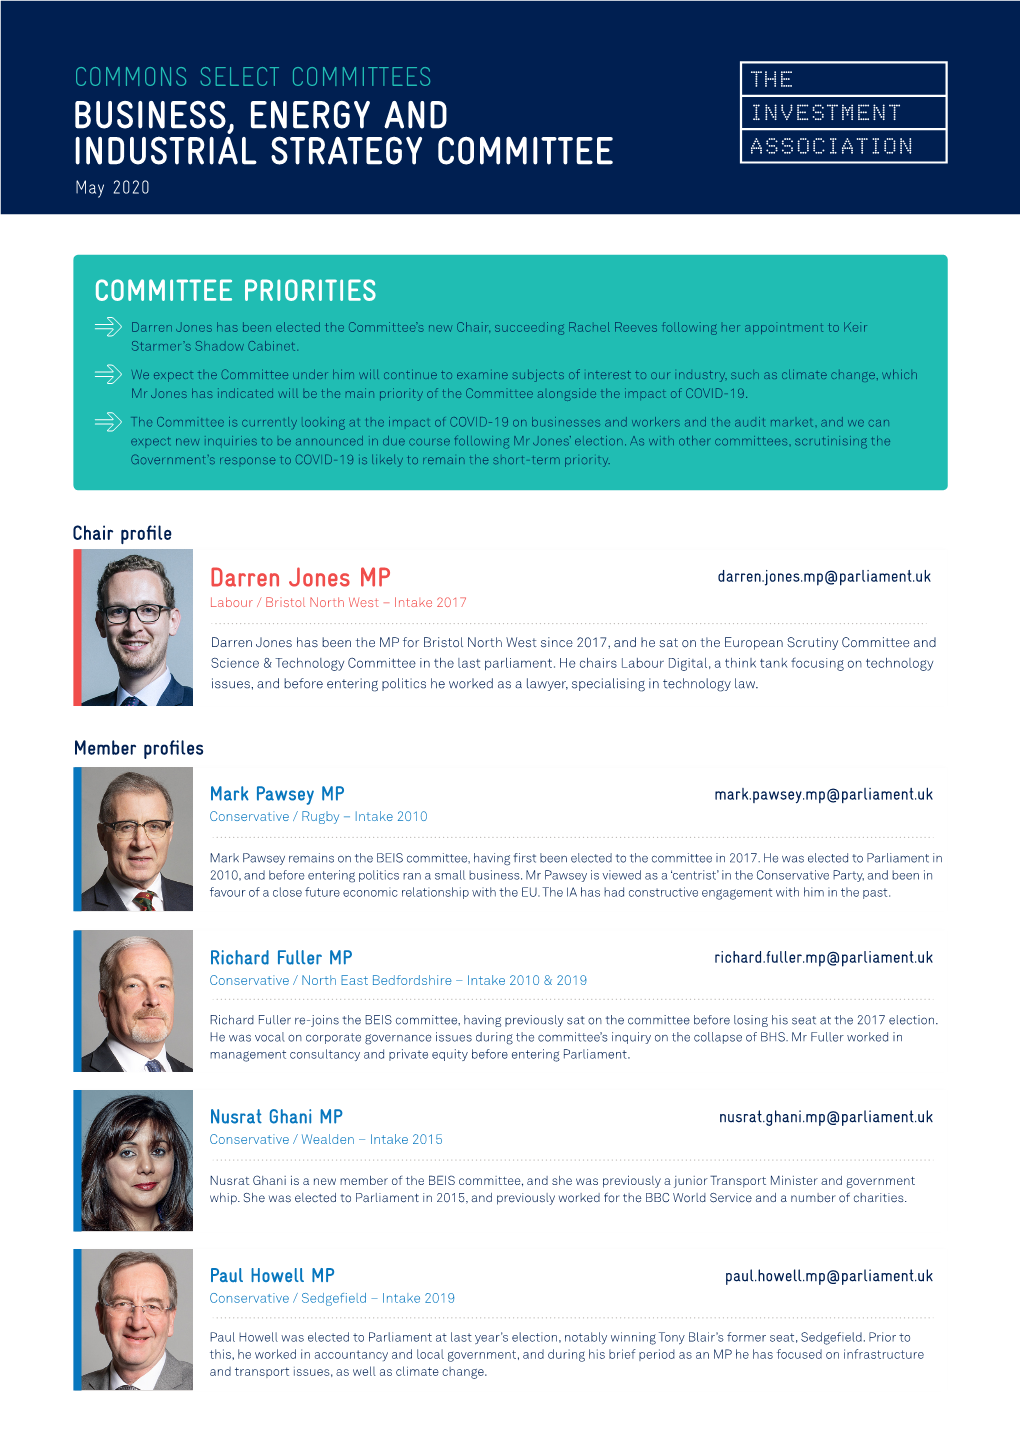 BUSINESS, ENERGY and INDUSTRIAL STRATEGY COMMITTEE May 2020